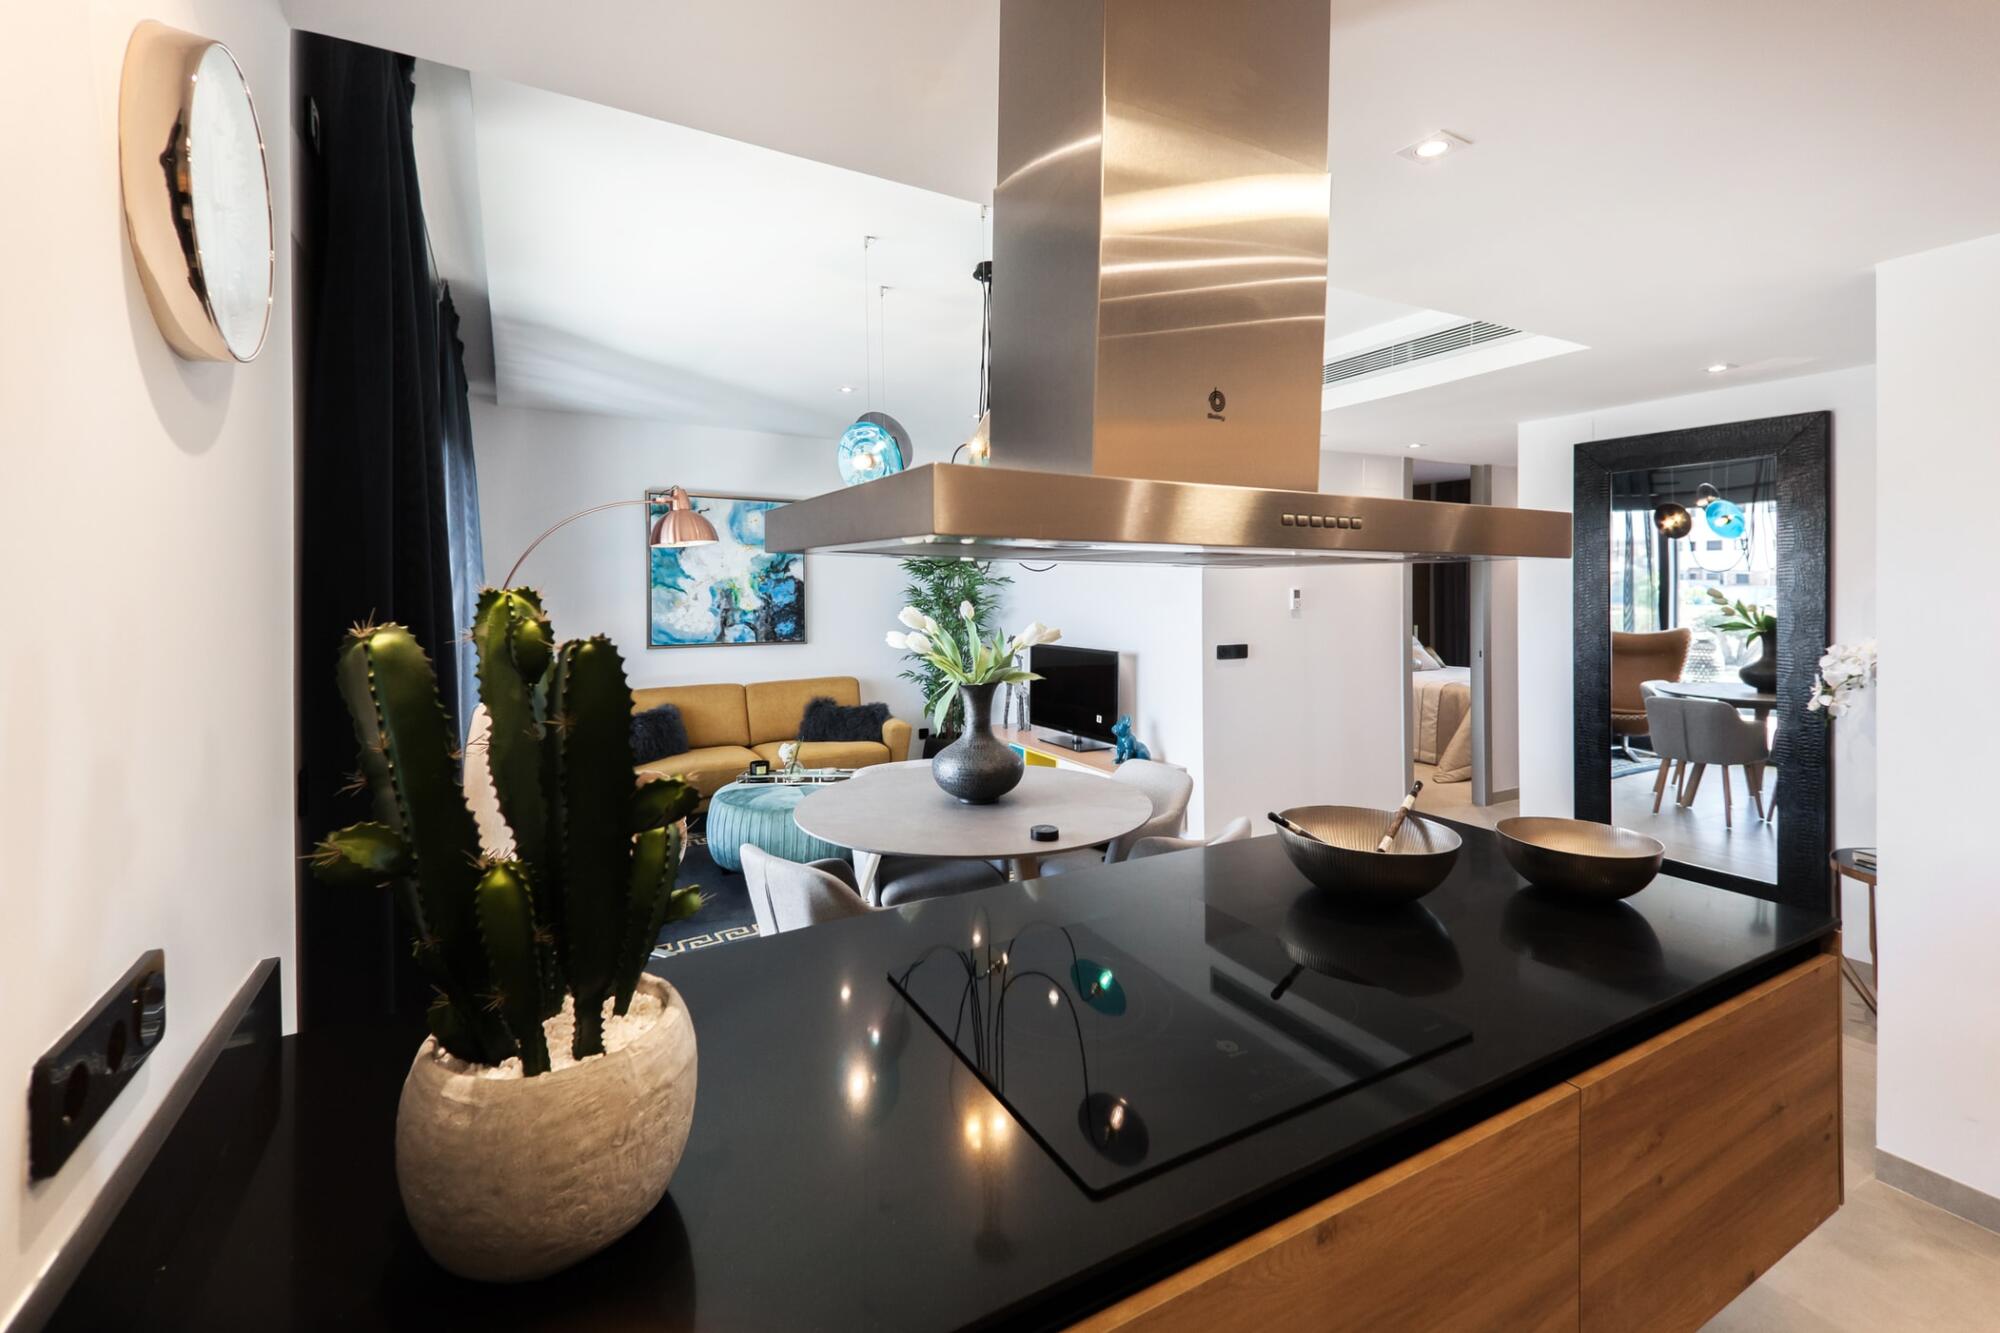 A black kitchen with a cactus on the counter, renovation